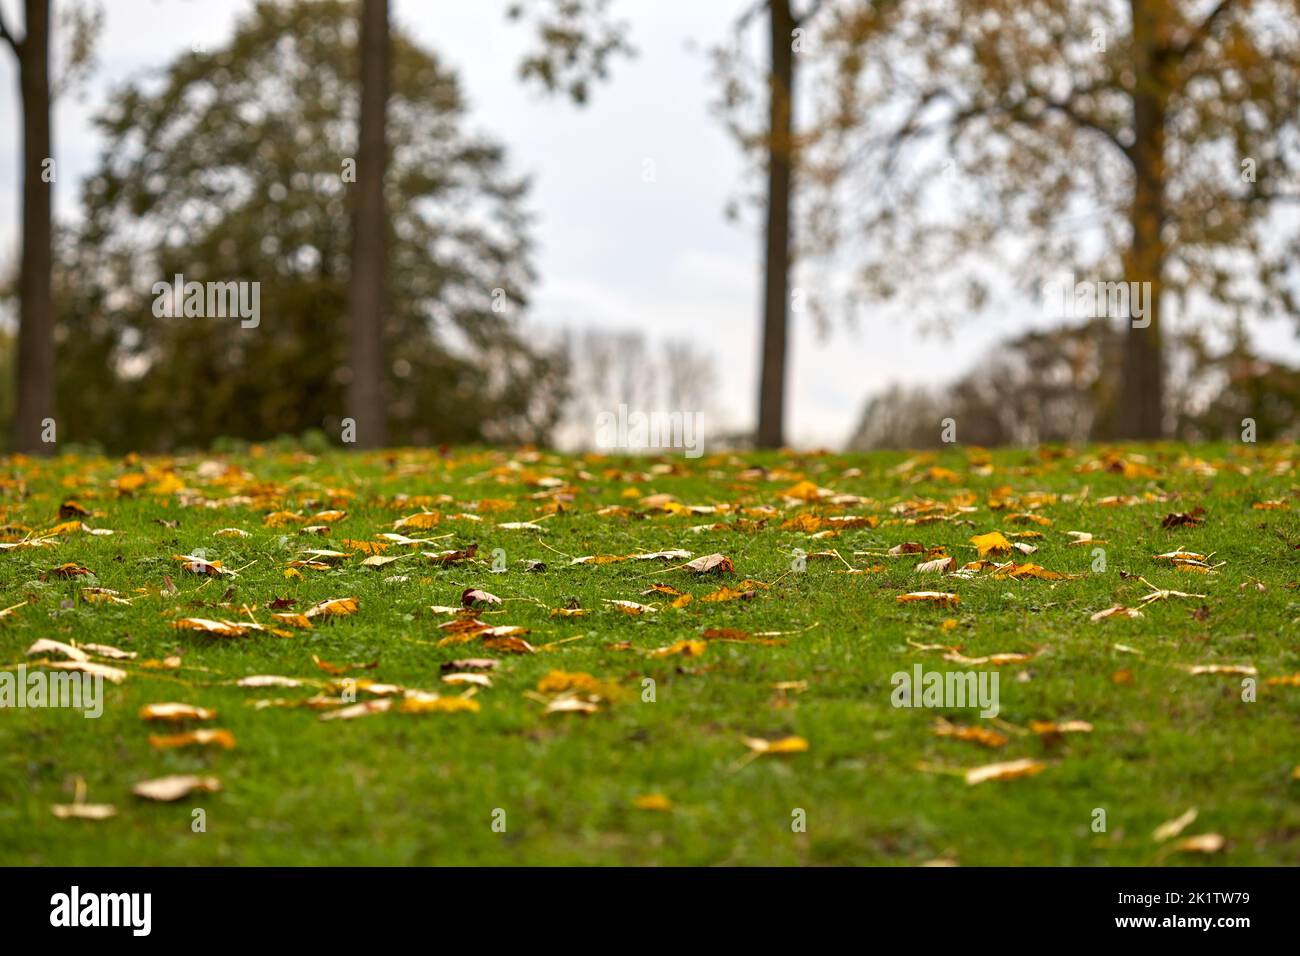 Fallen autumn leaves in the park - close up view Stock Photo